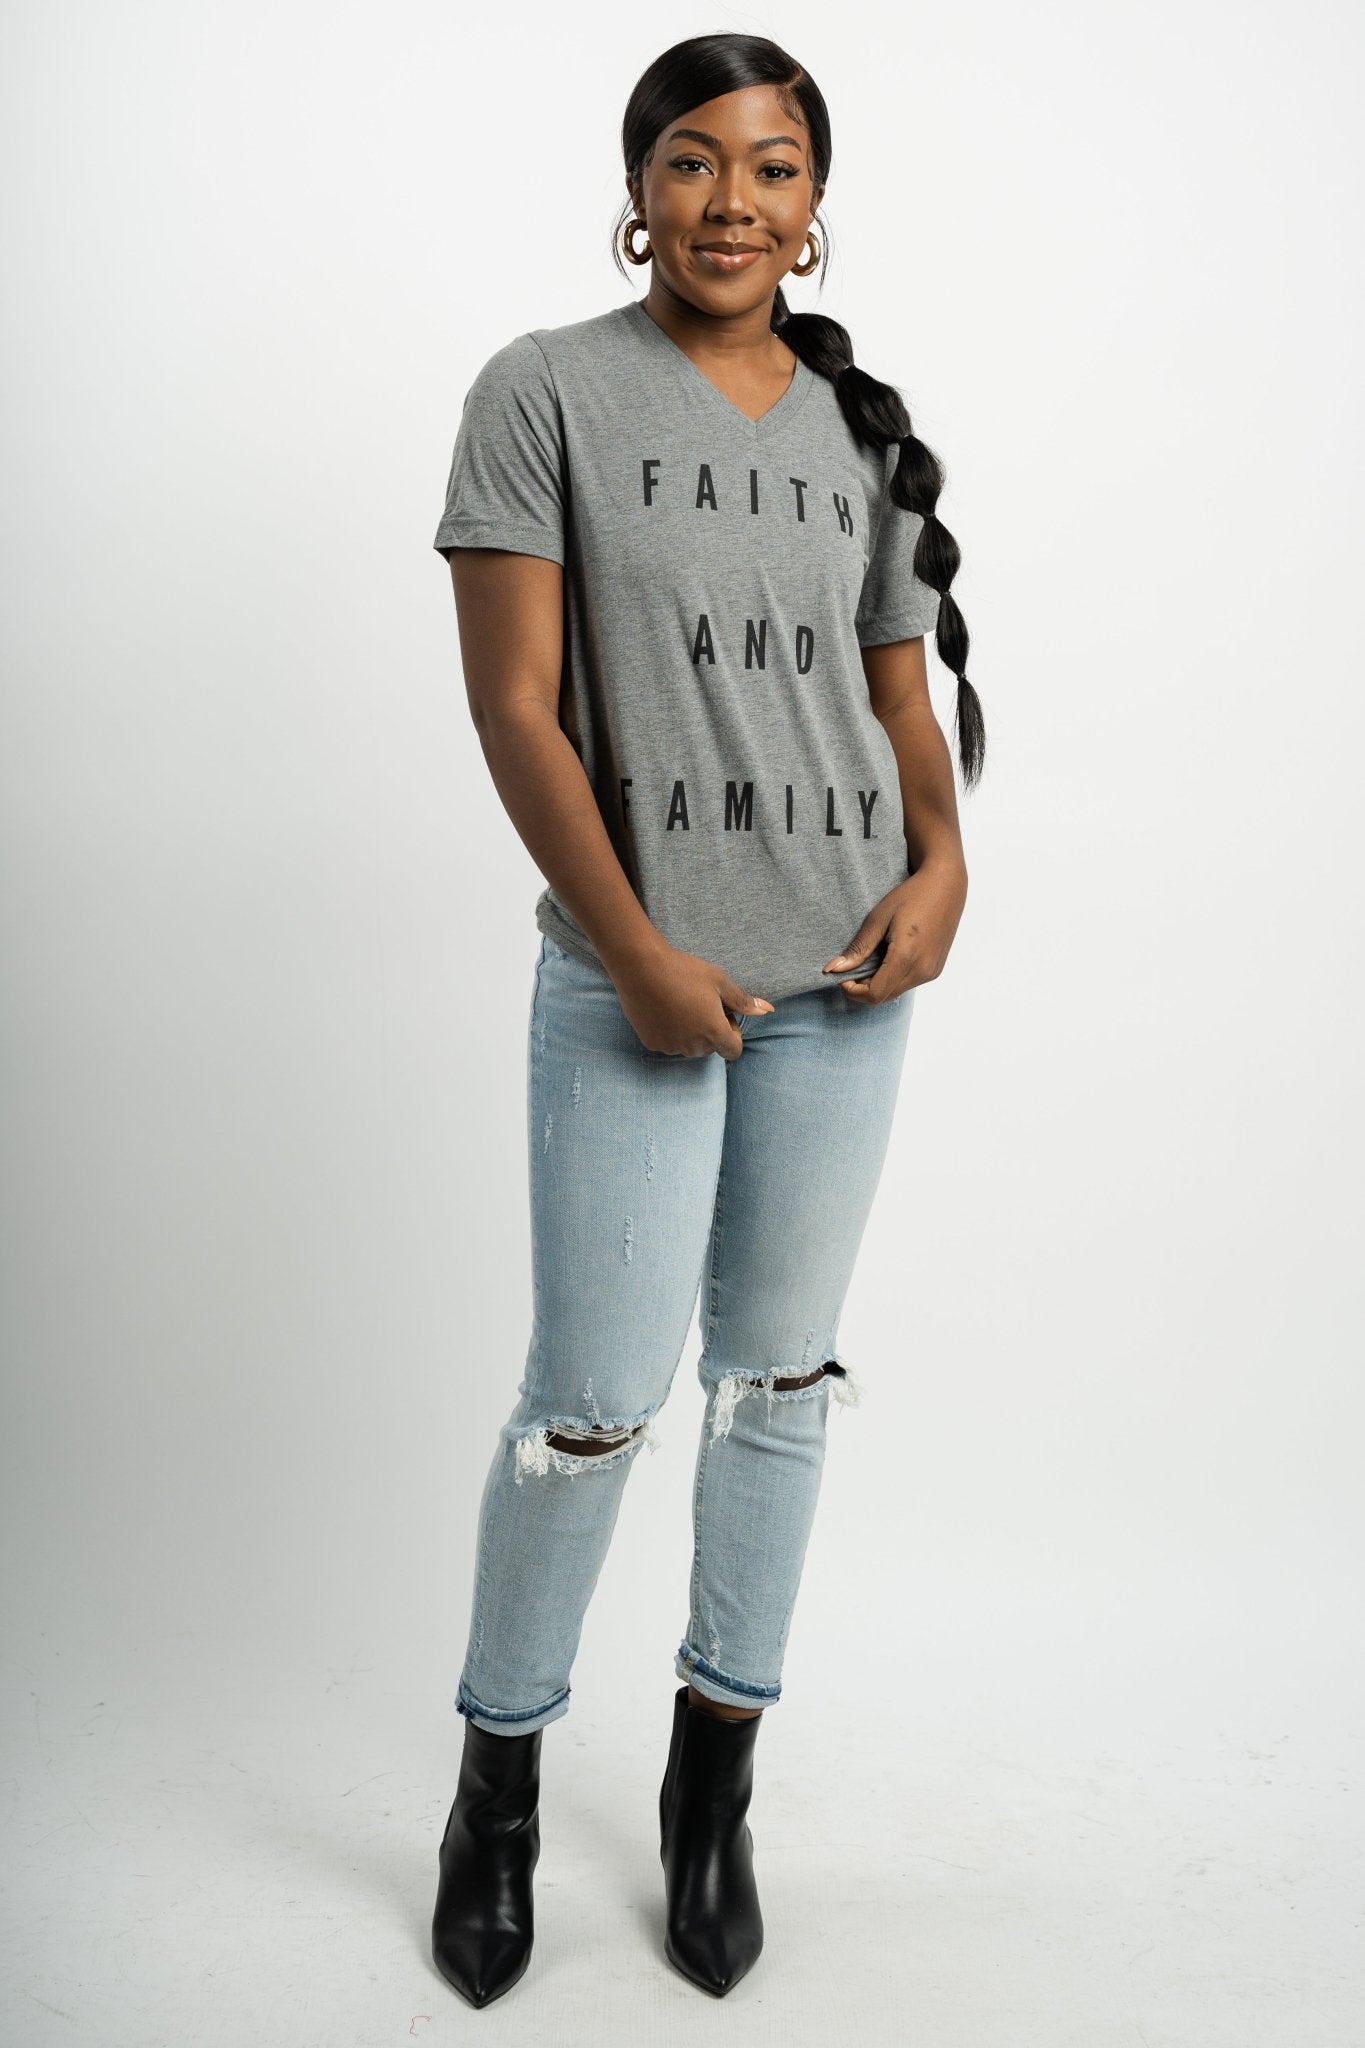 Faith and Family unisex short sleeve v-neck t-shirt grey - Trendy T-shirts - Cute Graphic Tee Fashion at Lush Fashion Lounge Boutique in Oklahoma